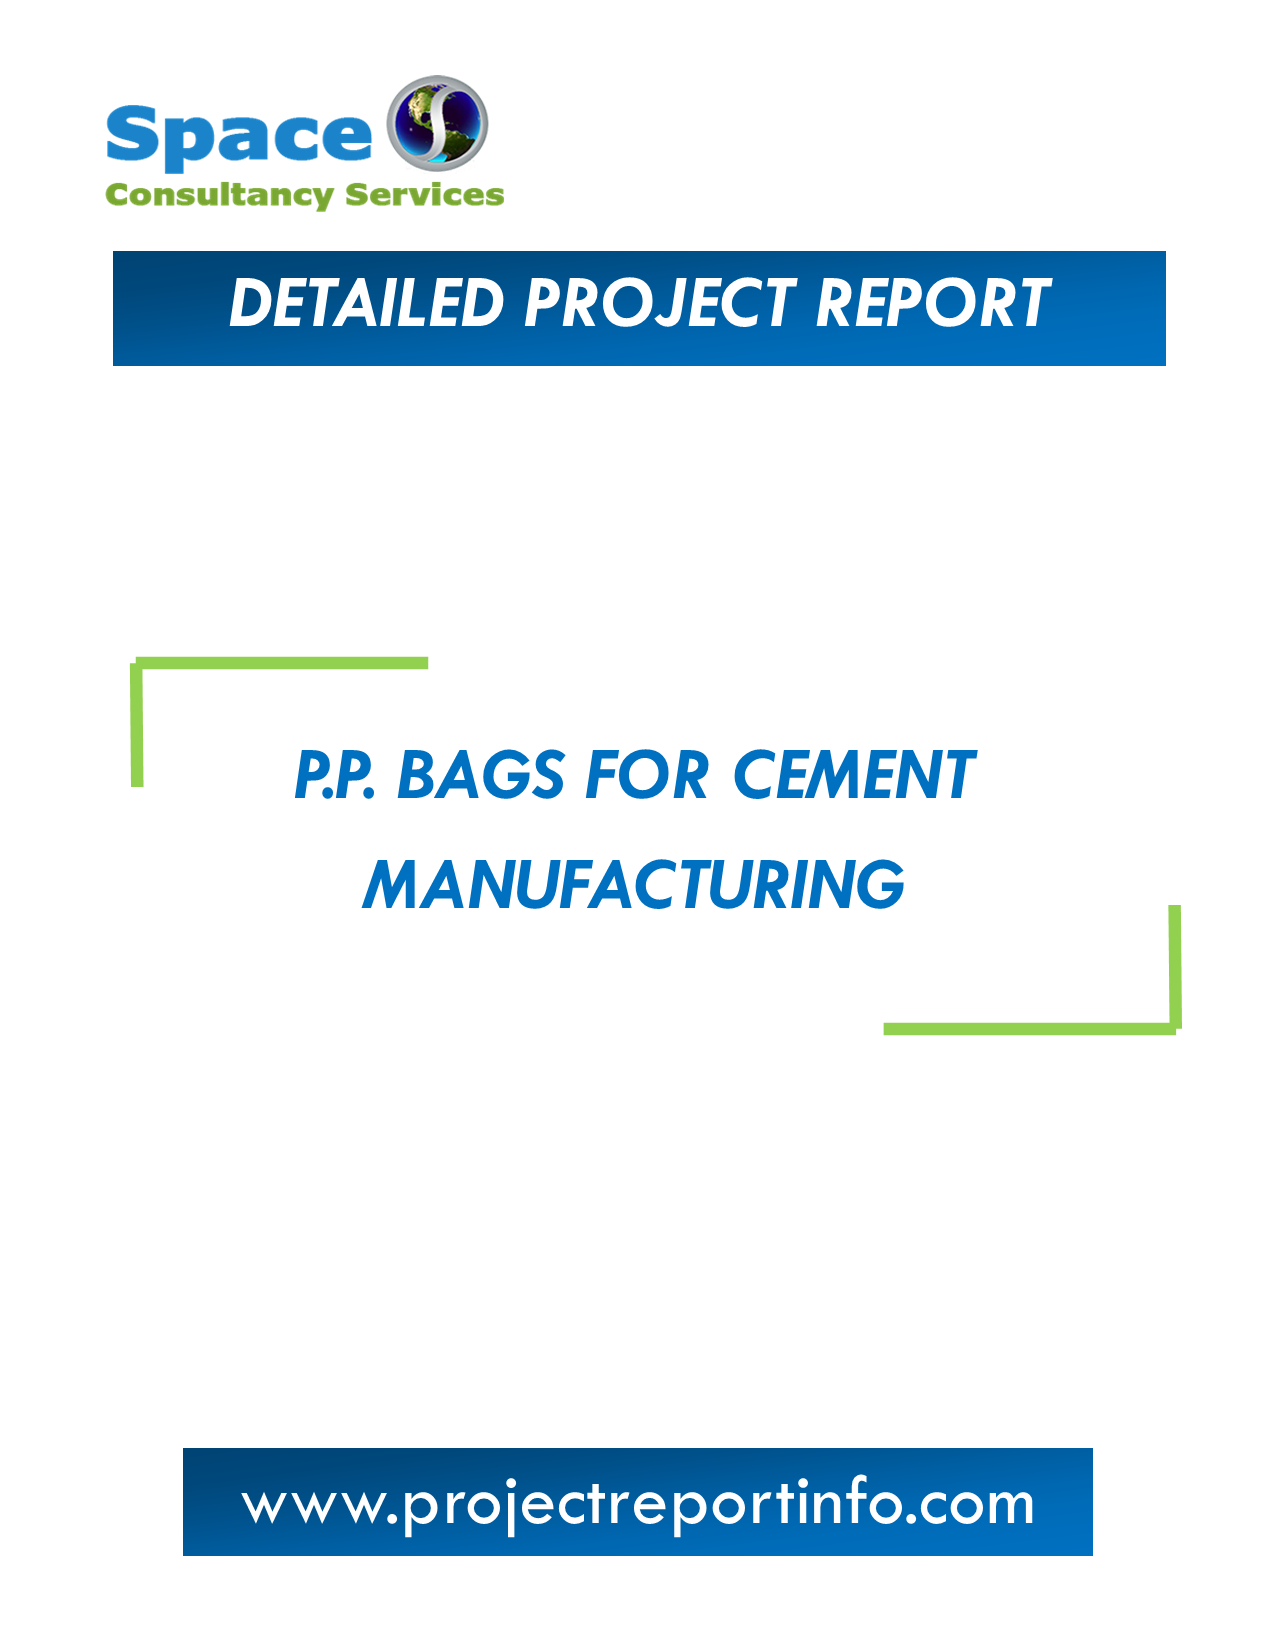 Project Report on P.P. Bags for Cement Manufacturing